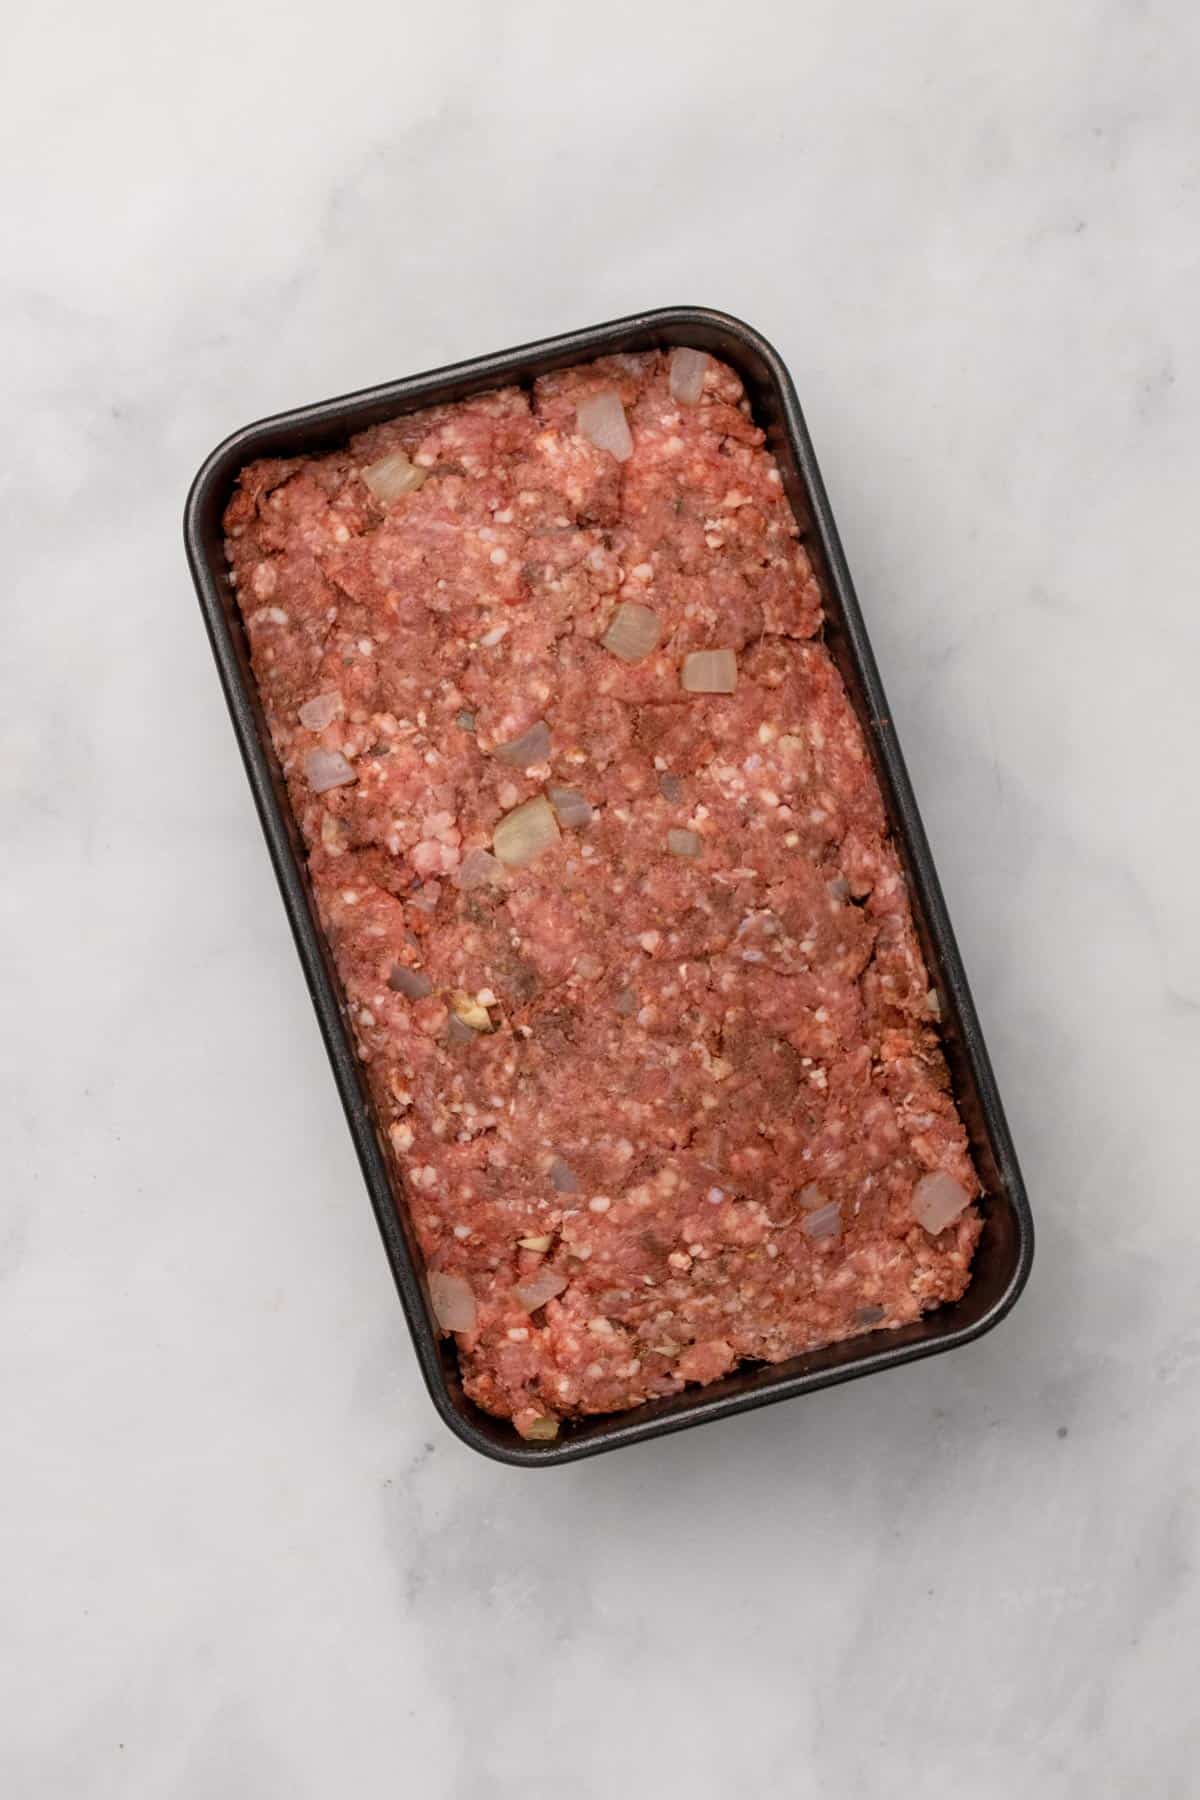 Raw meatloaf ingredients pressed into a baking dish, as seen from above